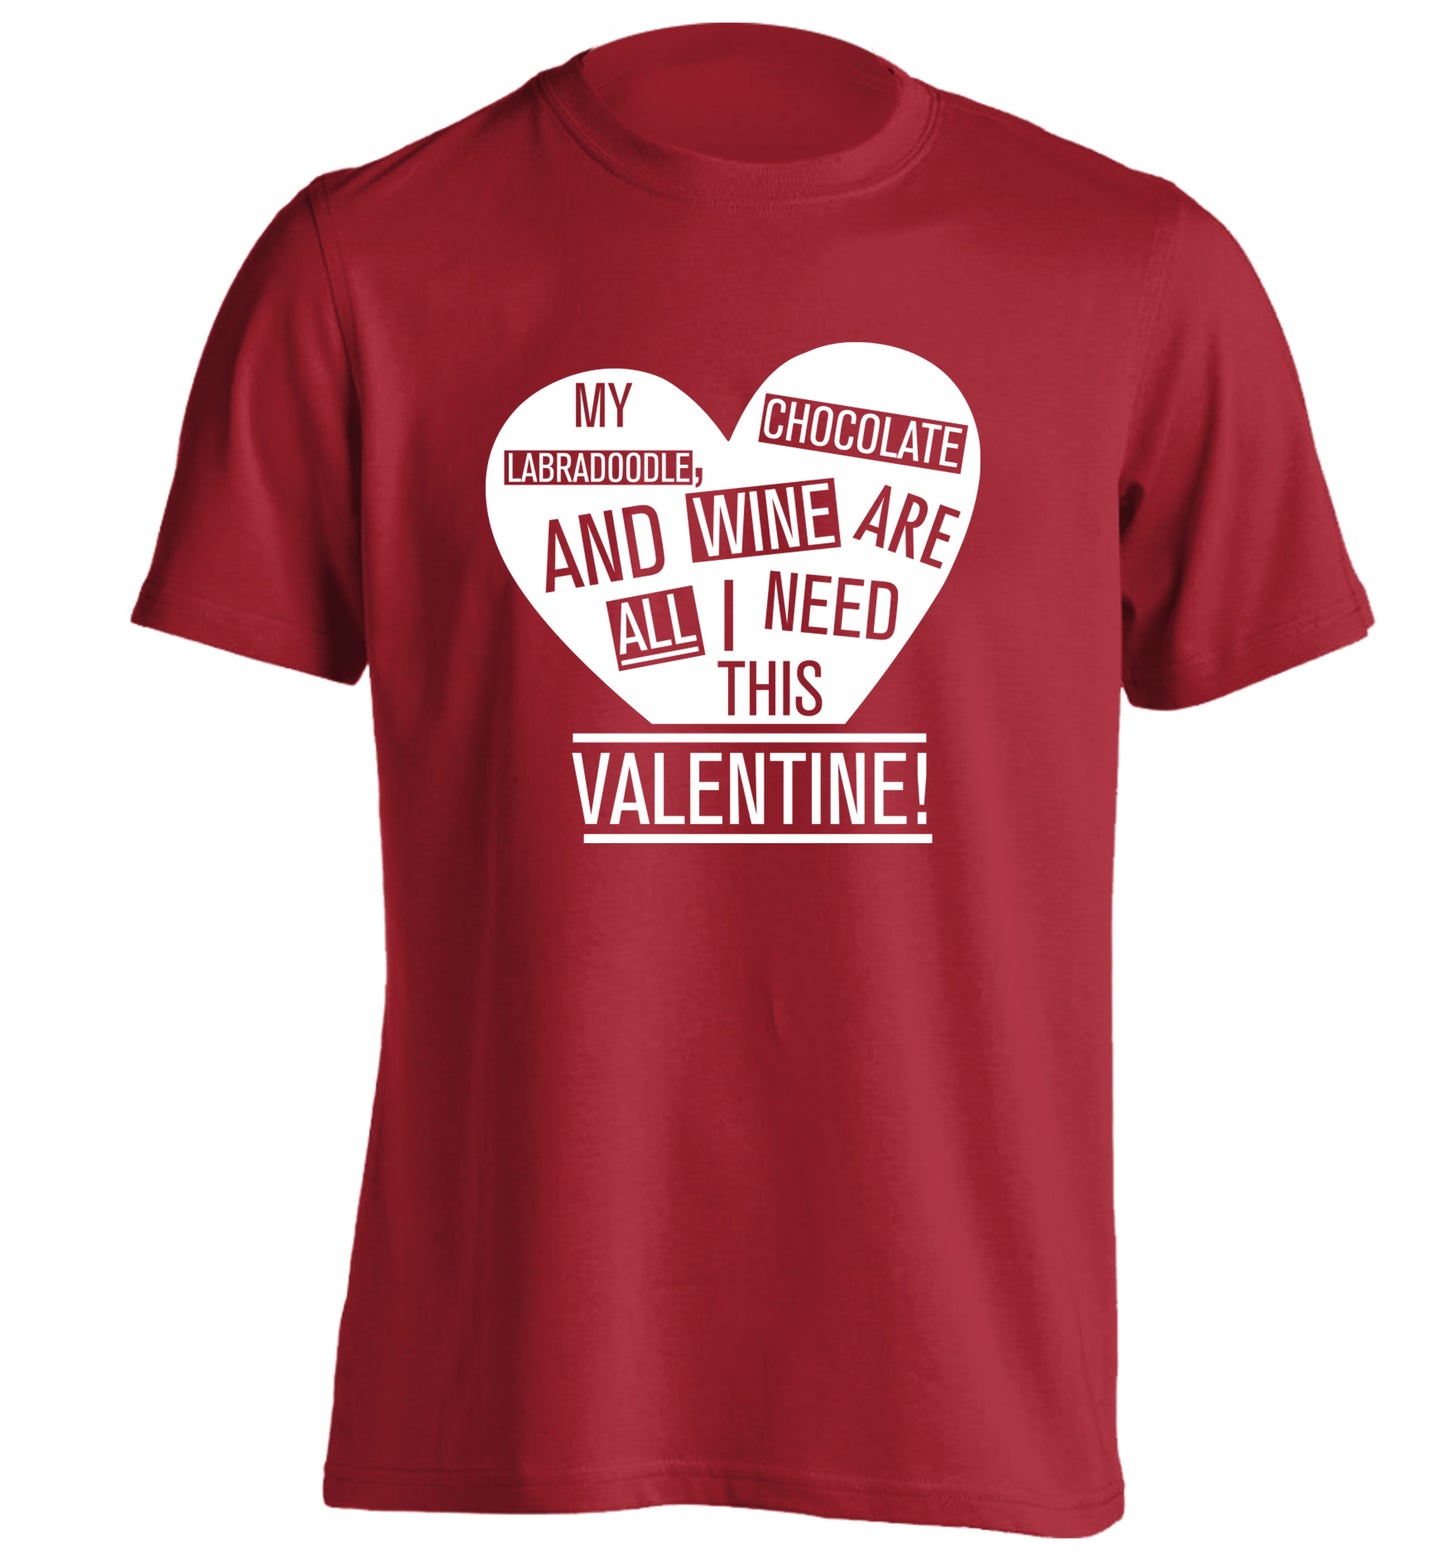 My labradoodle, chocolate and wine are all I need this valentine! adults unisex red Tshirt 2XL